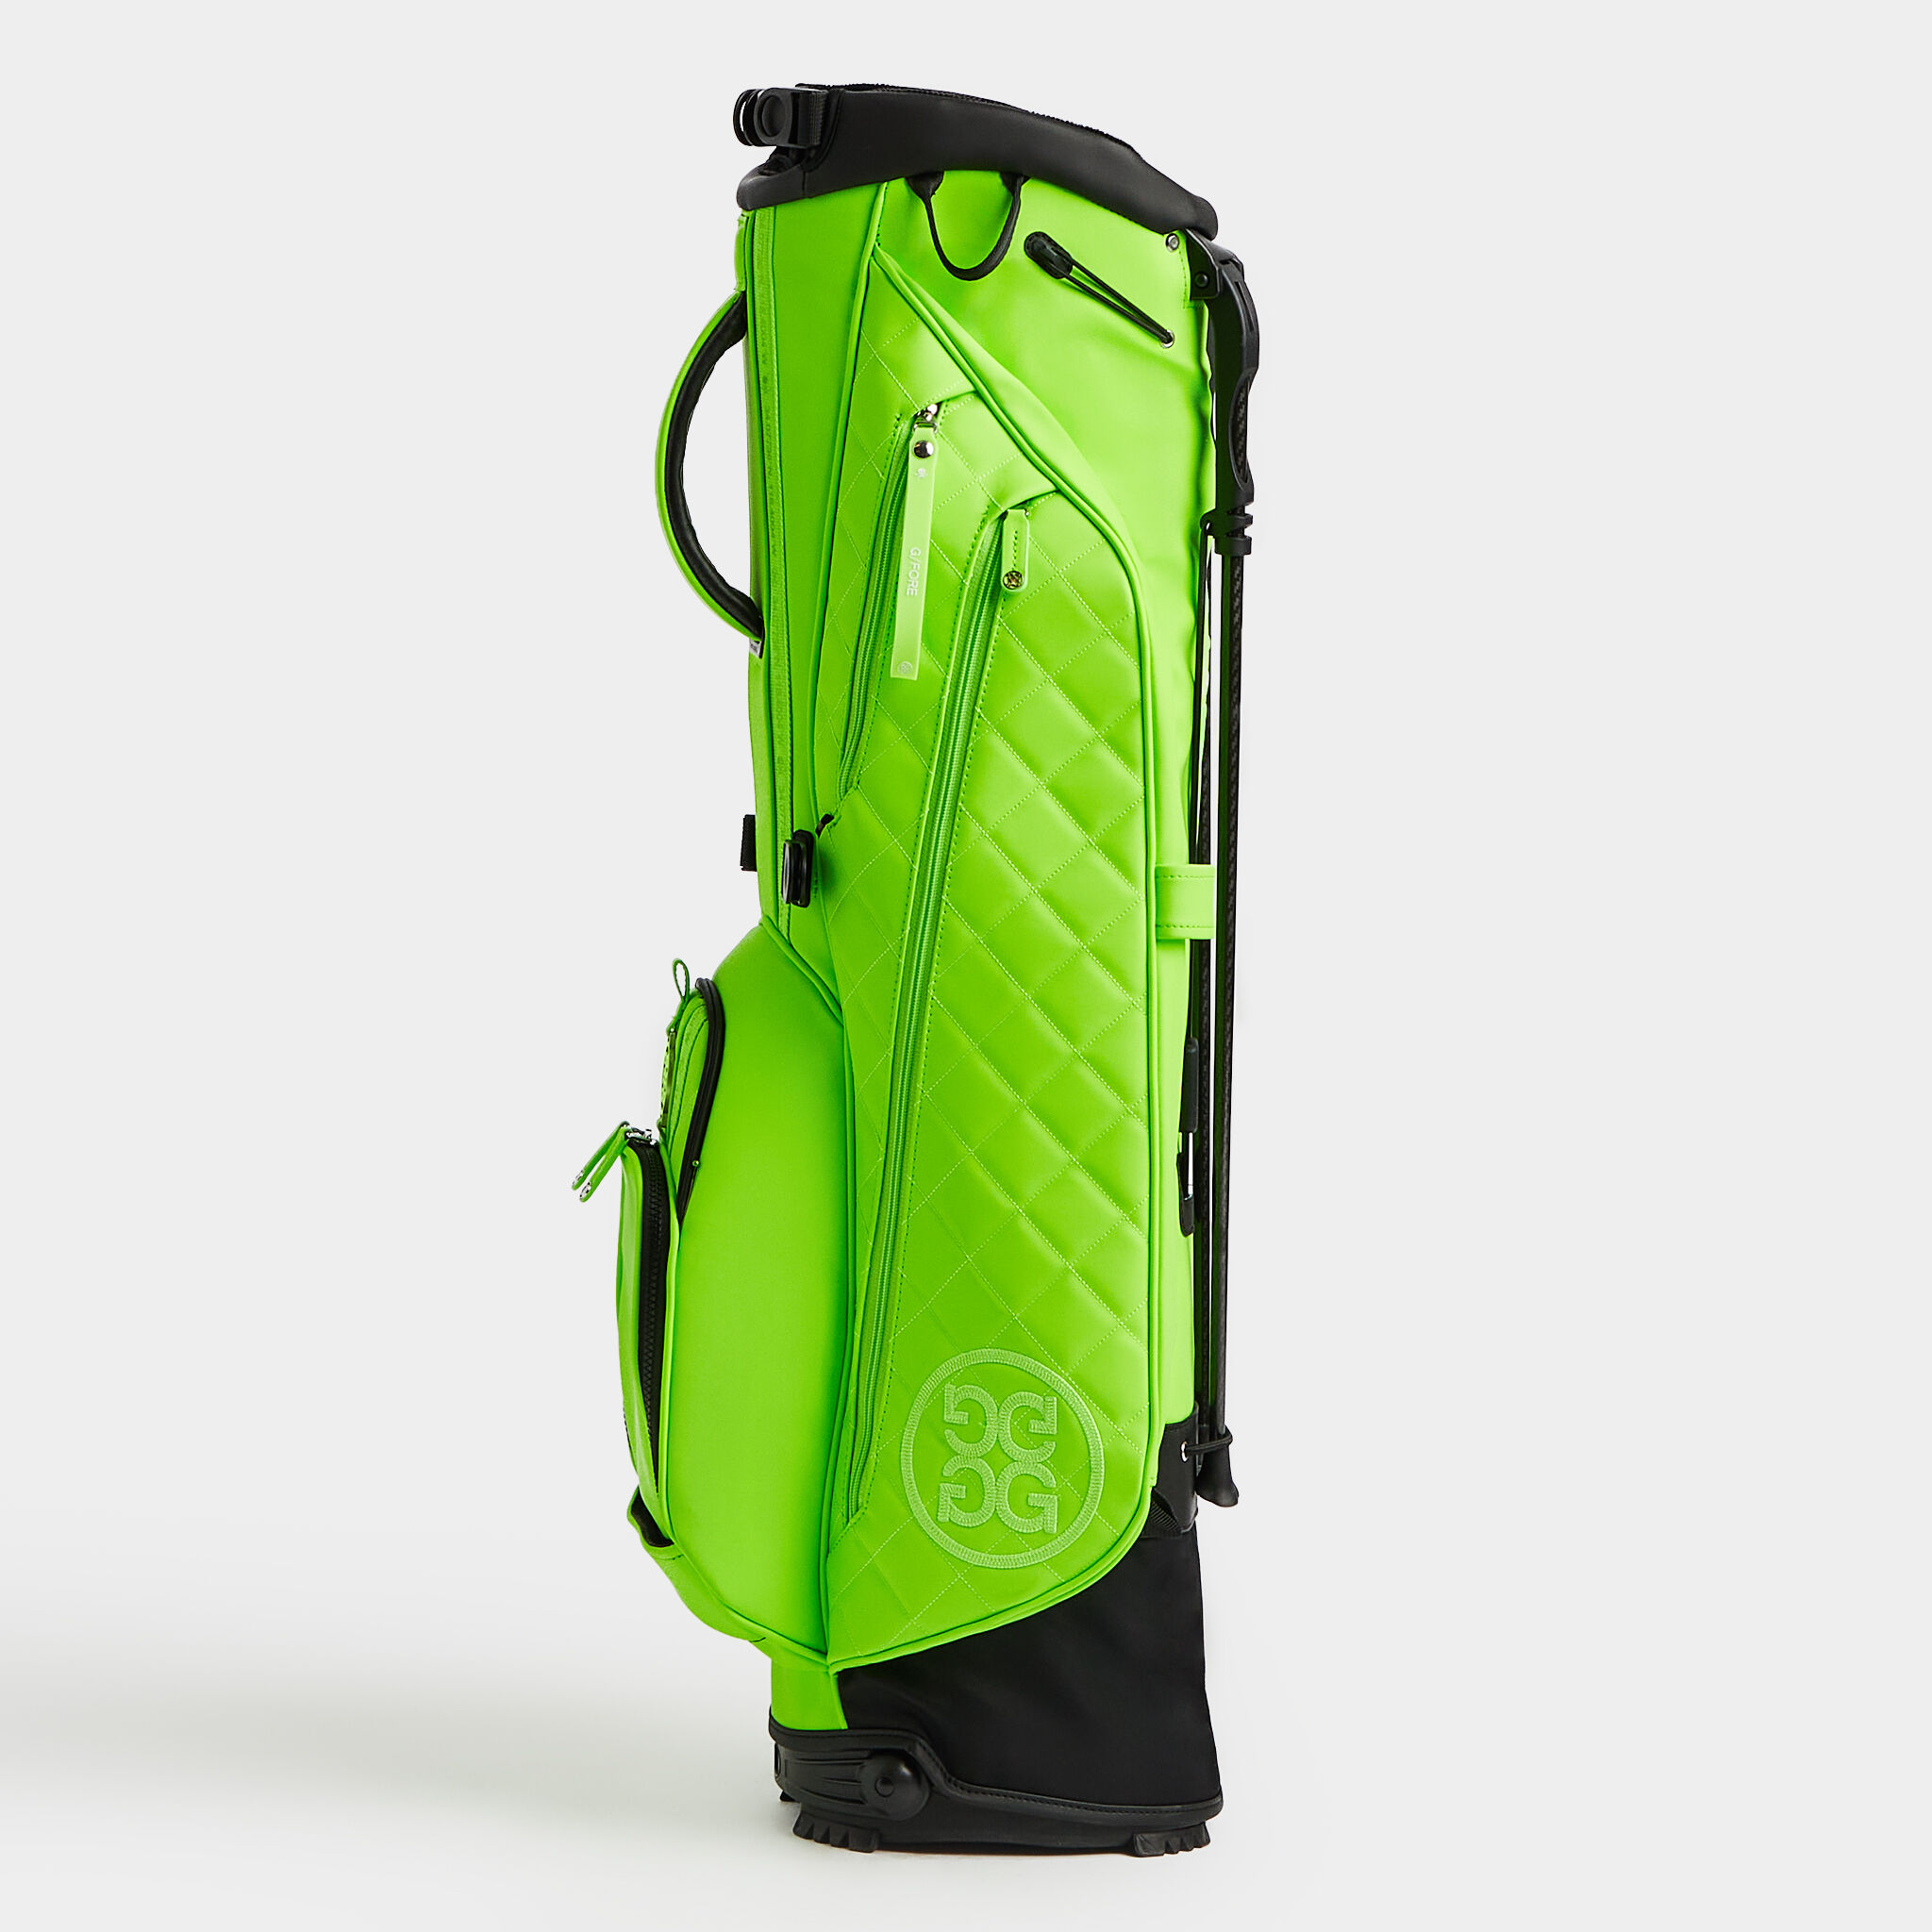 DAYTONA PLUS CARRY GOLF BAG | GOLF BAGS FOR MEN AND WOMEN | G/FORE